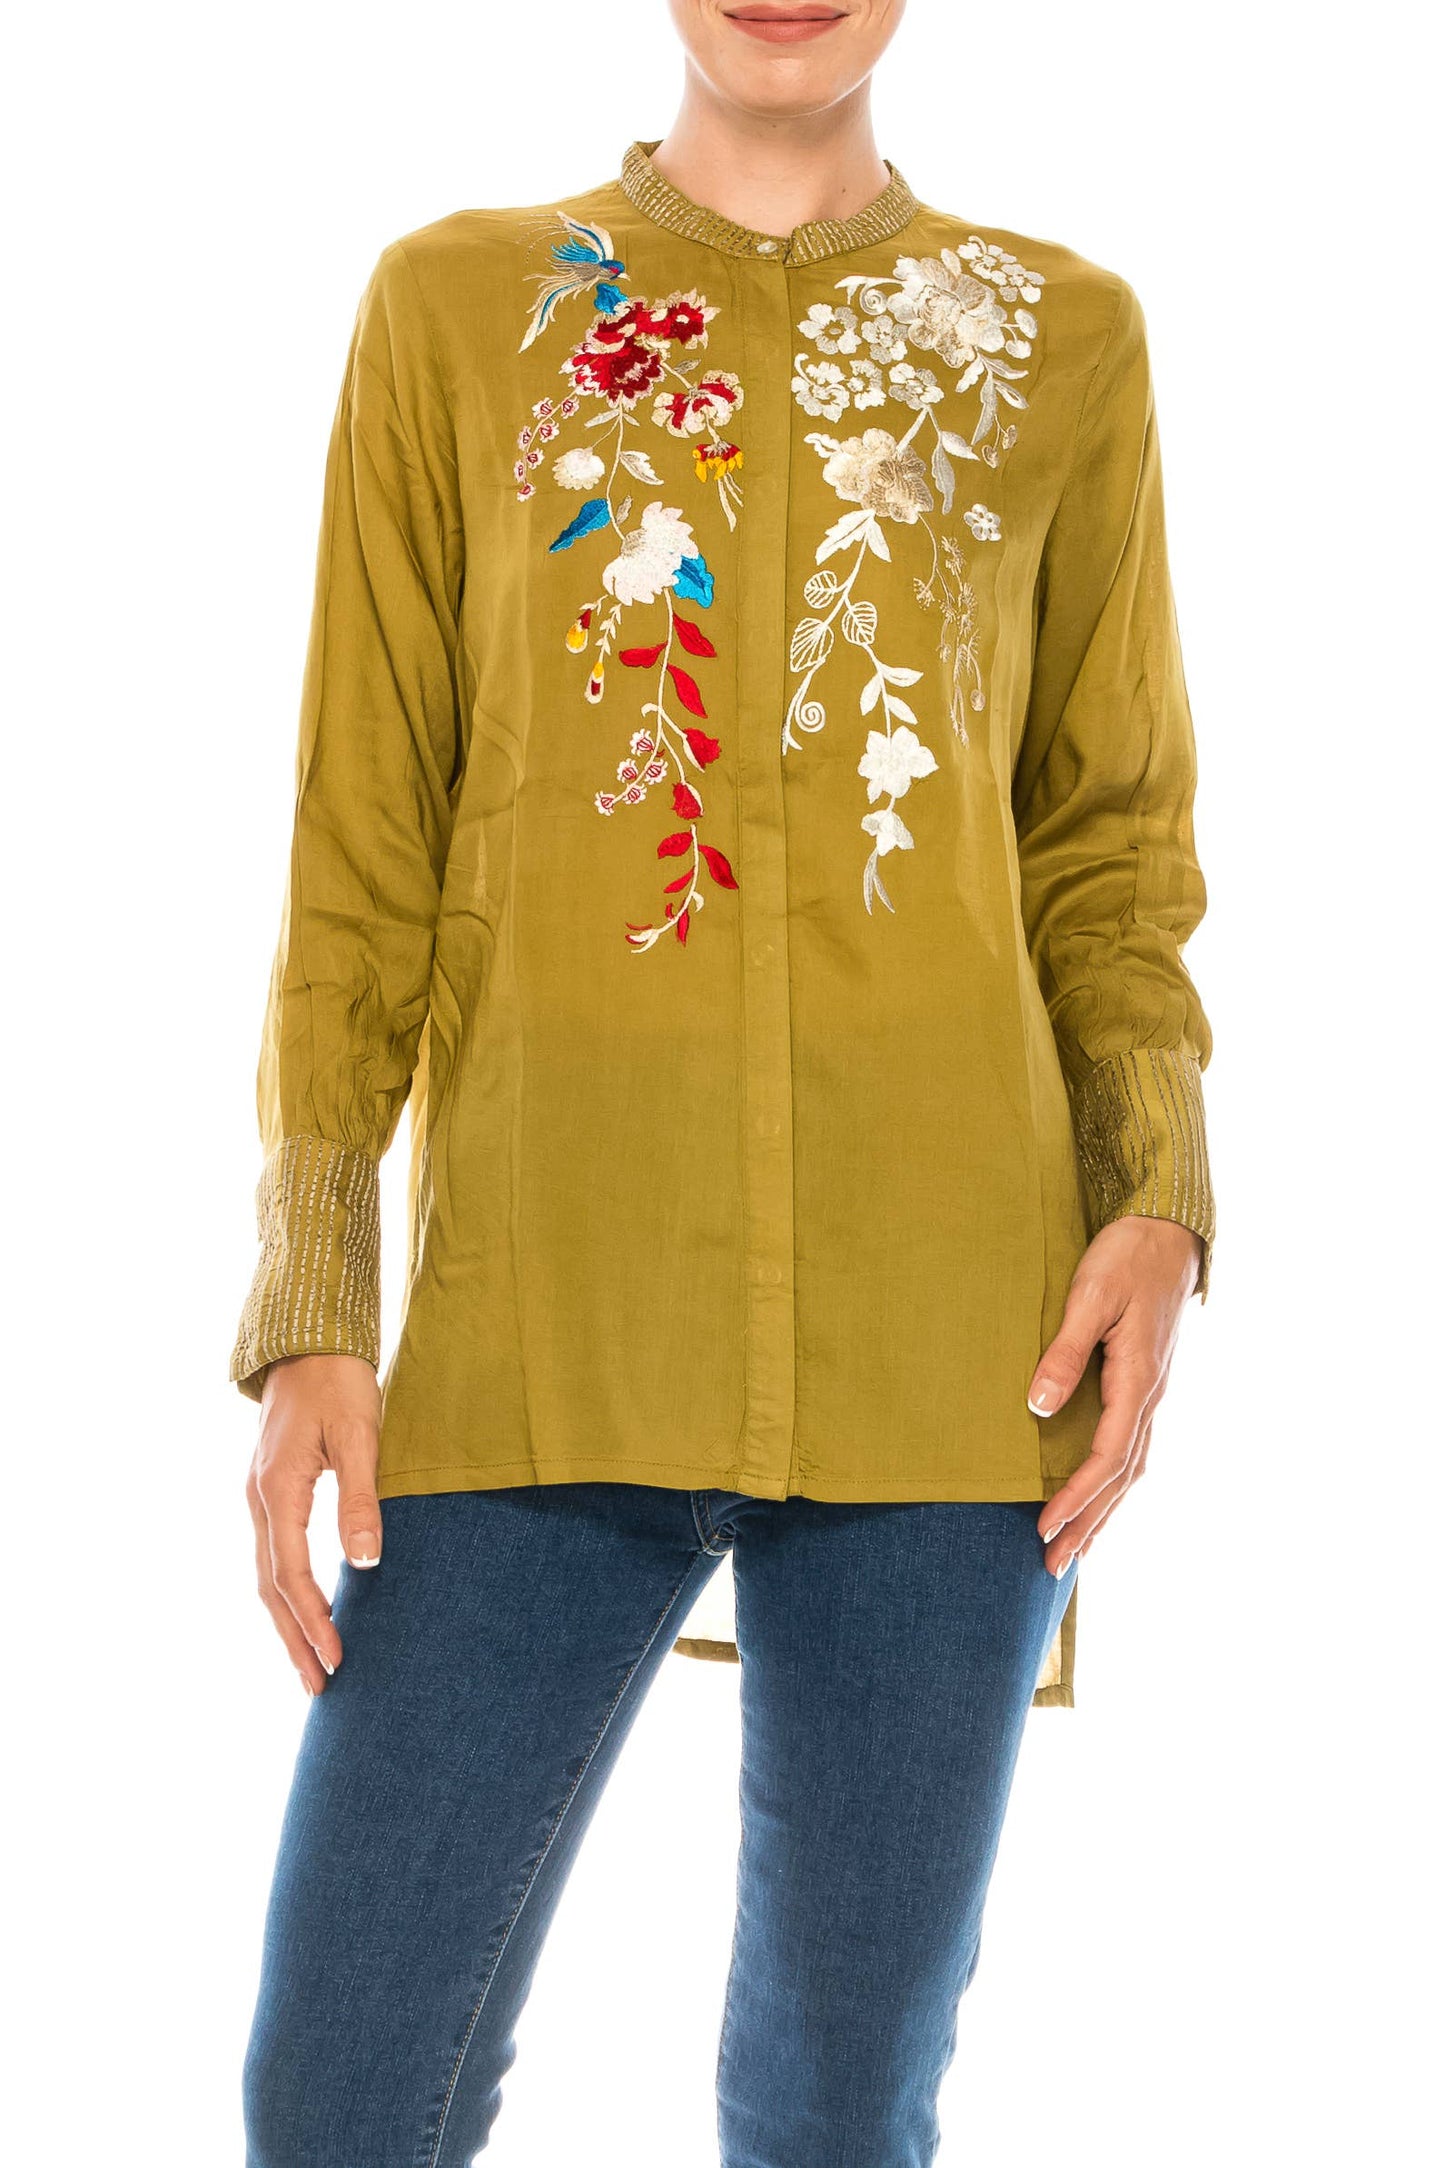 Button-down Boho Top with Embroidery